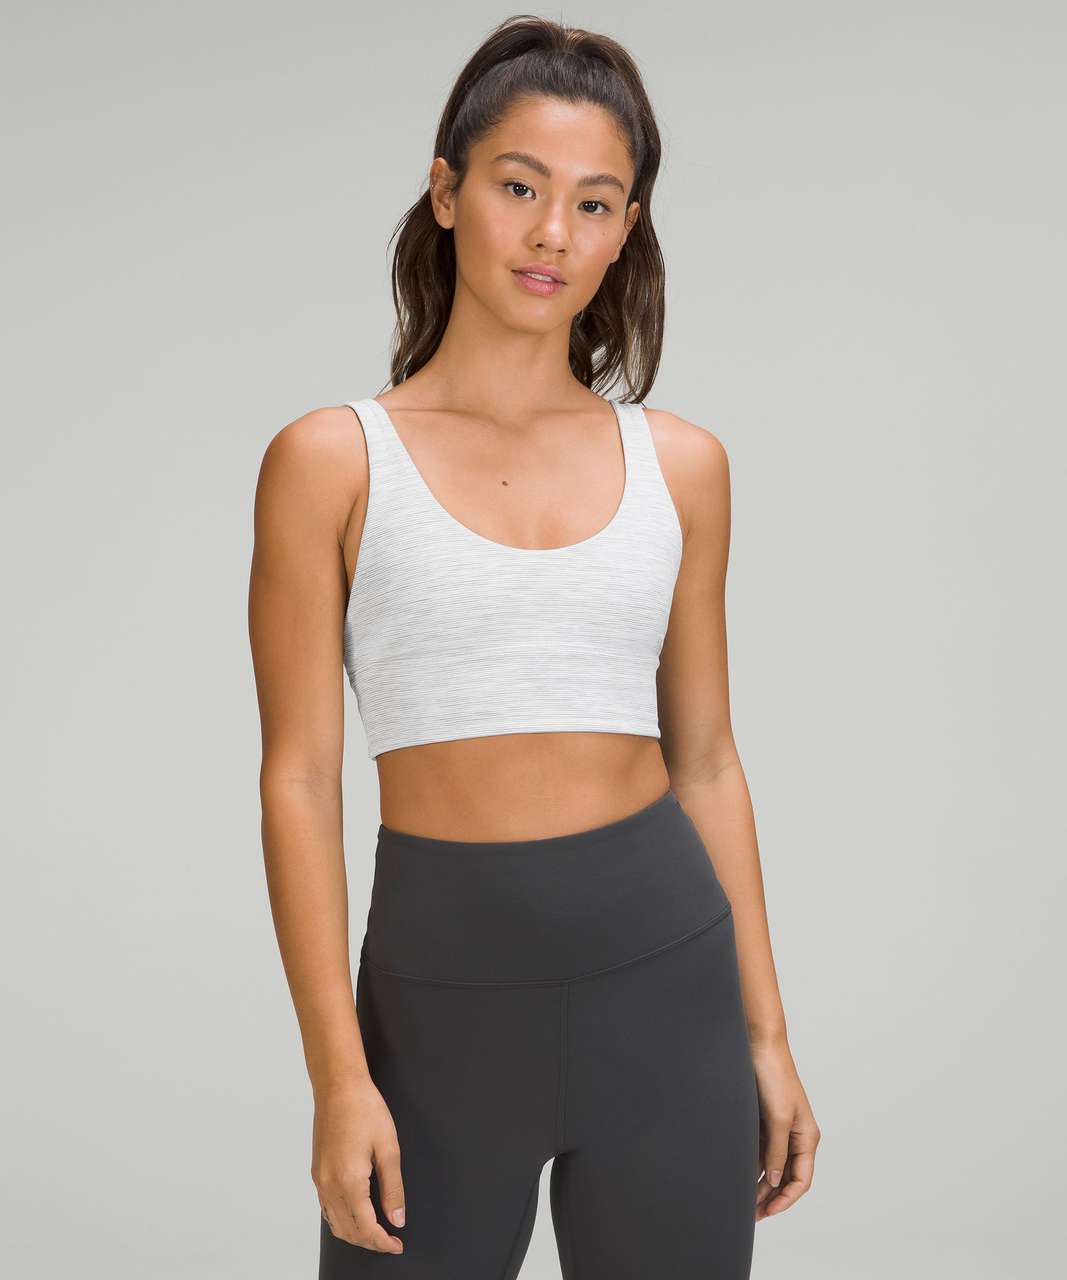 Lululemon Align Bra *Light Support, A/B Cup - Wee Are From Space Nimbus Battleship / Wee Are From Space Nimbus Battleship